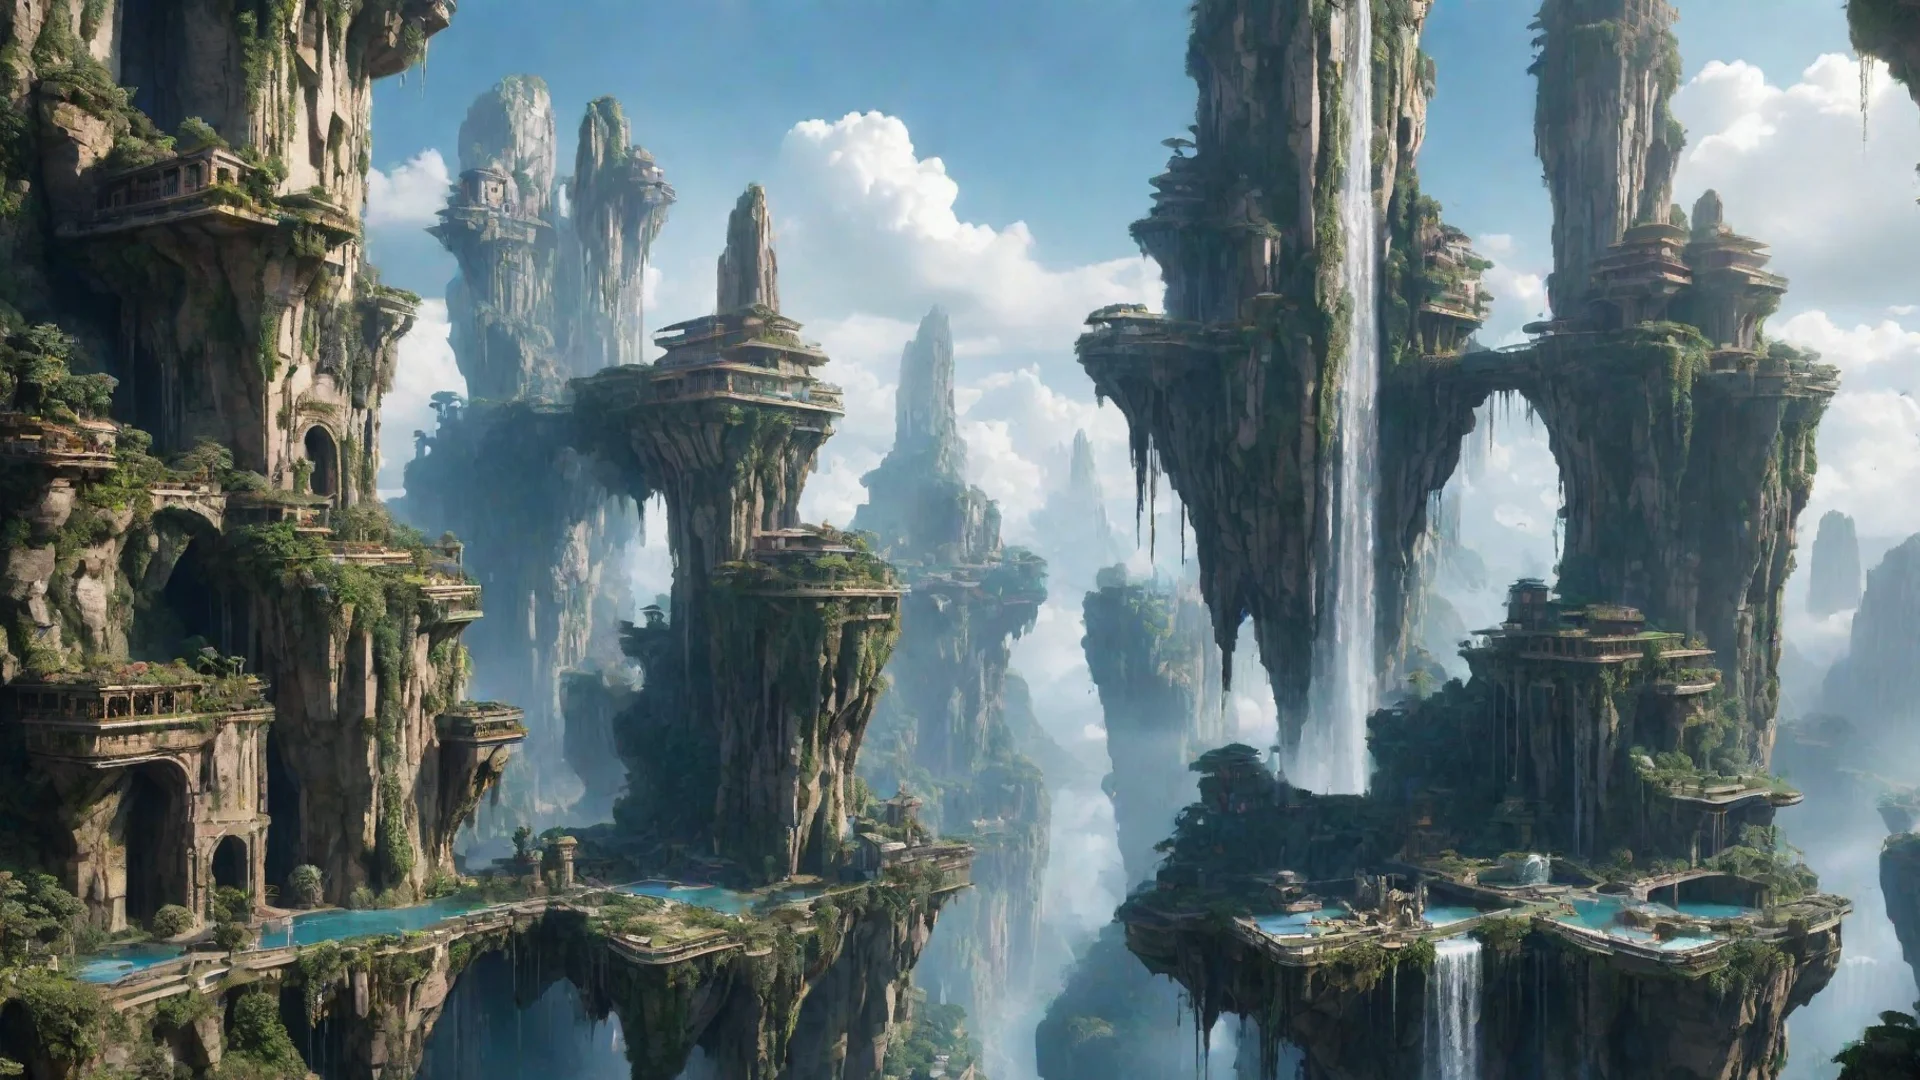 futuristic city amazing unreal architecture in sky epic floating city on floating cliffs with waterfalls down beautiful sky hanging gardens hd aesthetic wide